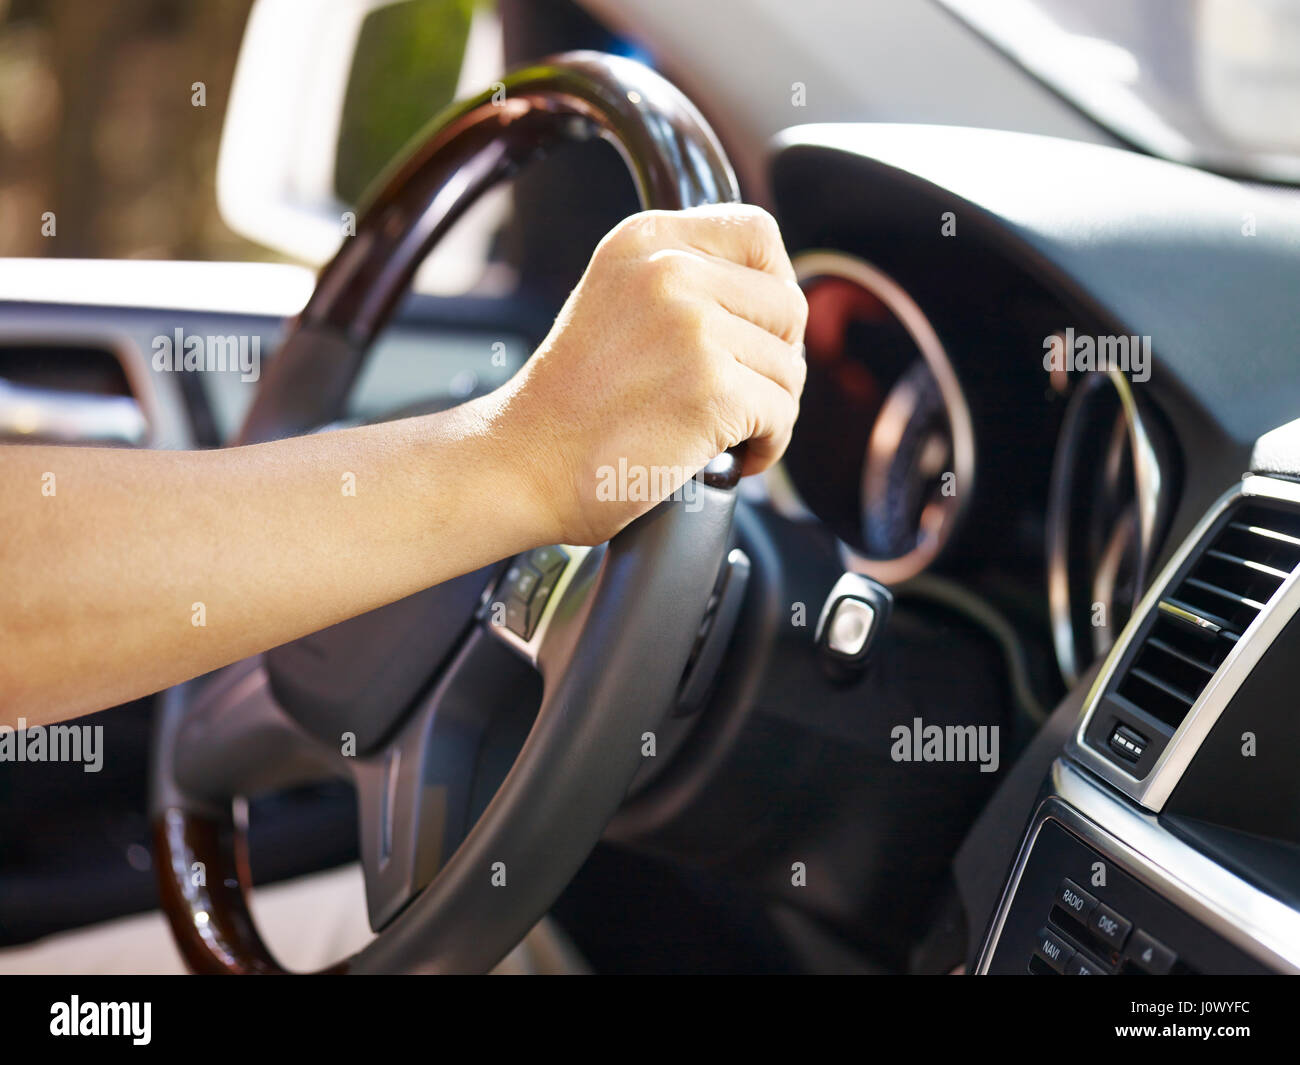 hand of a person holding steering wheel. Stock Photo